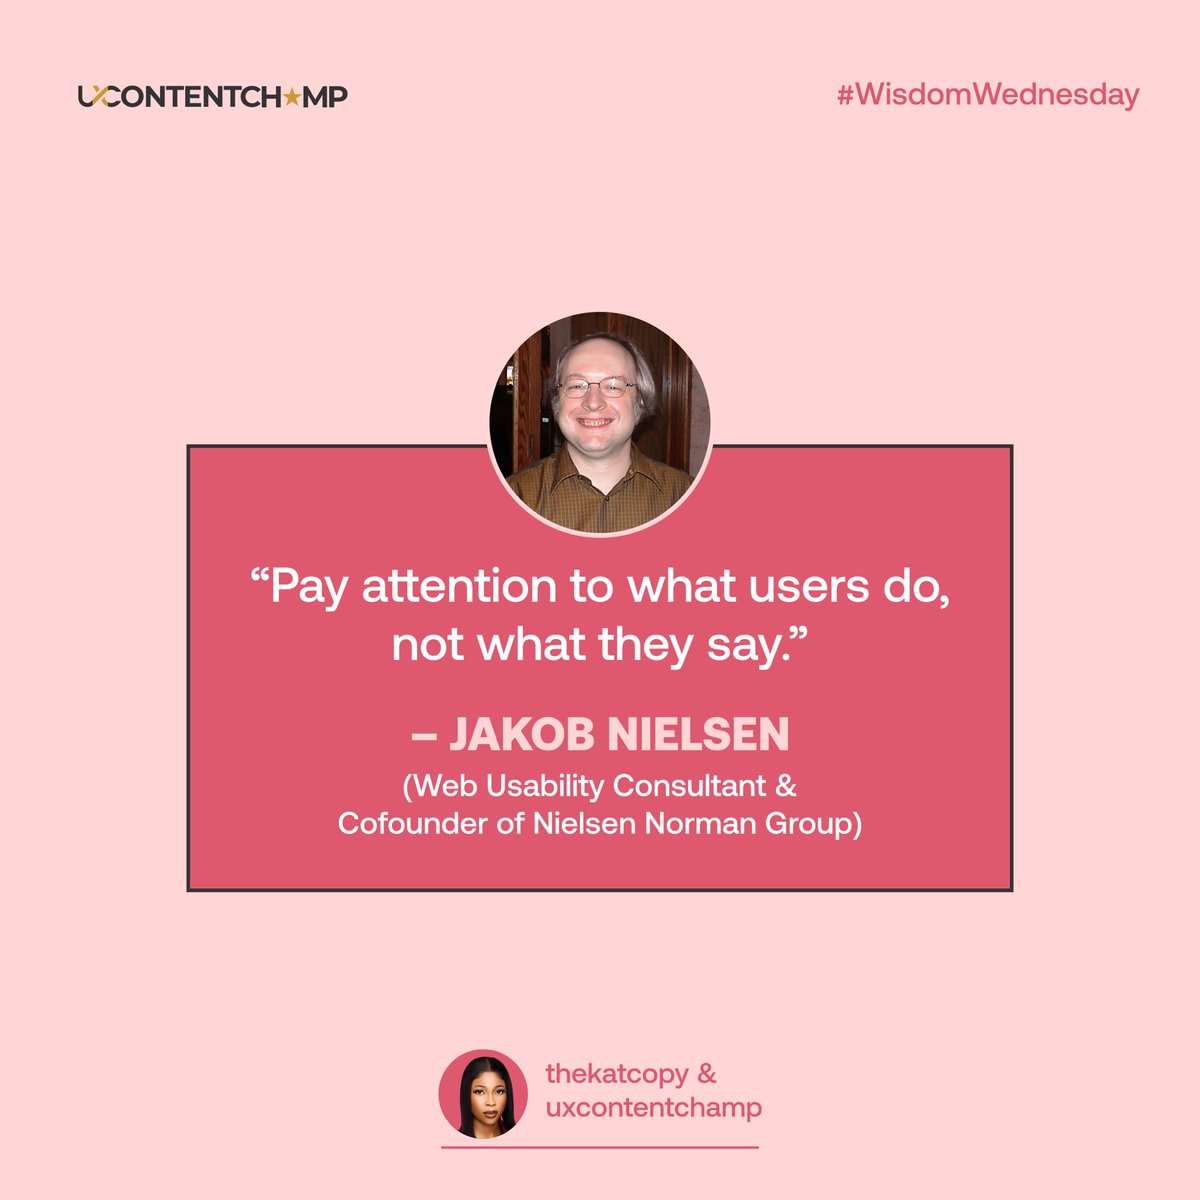 Eager to enhance your UX Writing skills? Look no further – we're here to assist you! 

As Jakob Nielsen reminds us, it's all about paying attention to what users do, not just what they say. 

👉 Follow us @uxcontentchamp for more.

#UXWriter #ContentDesign #UXQuotes #JacobNielsen